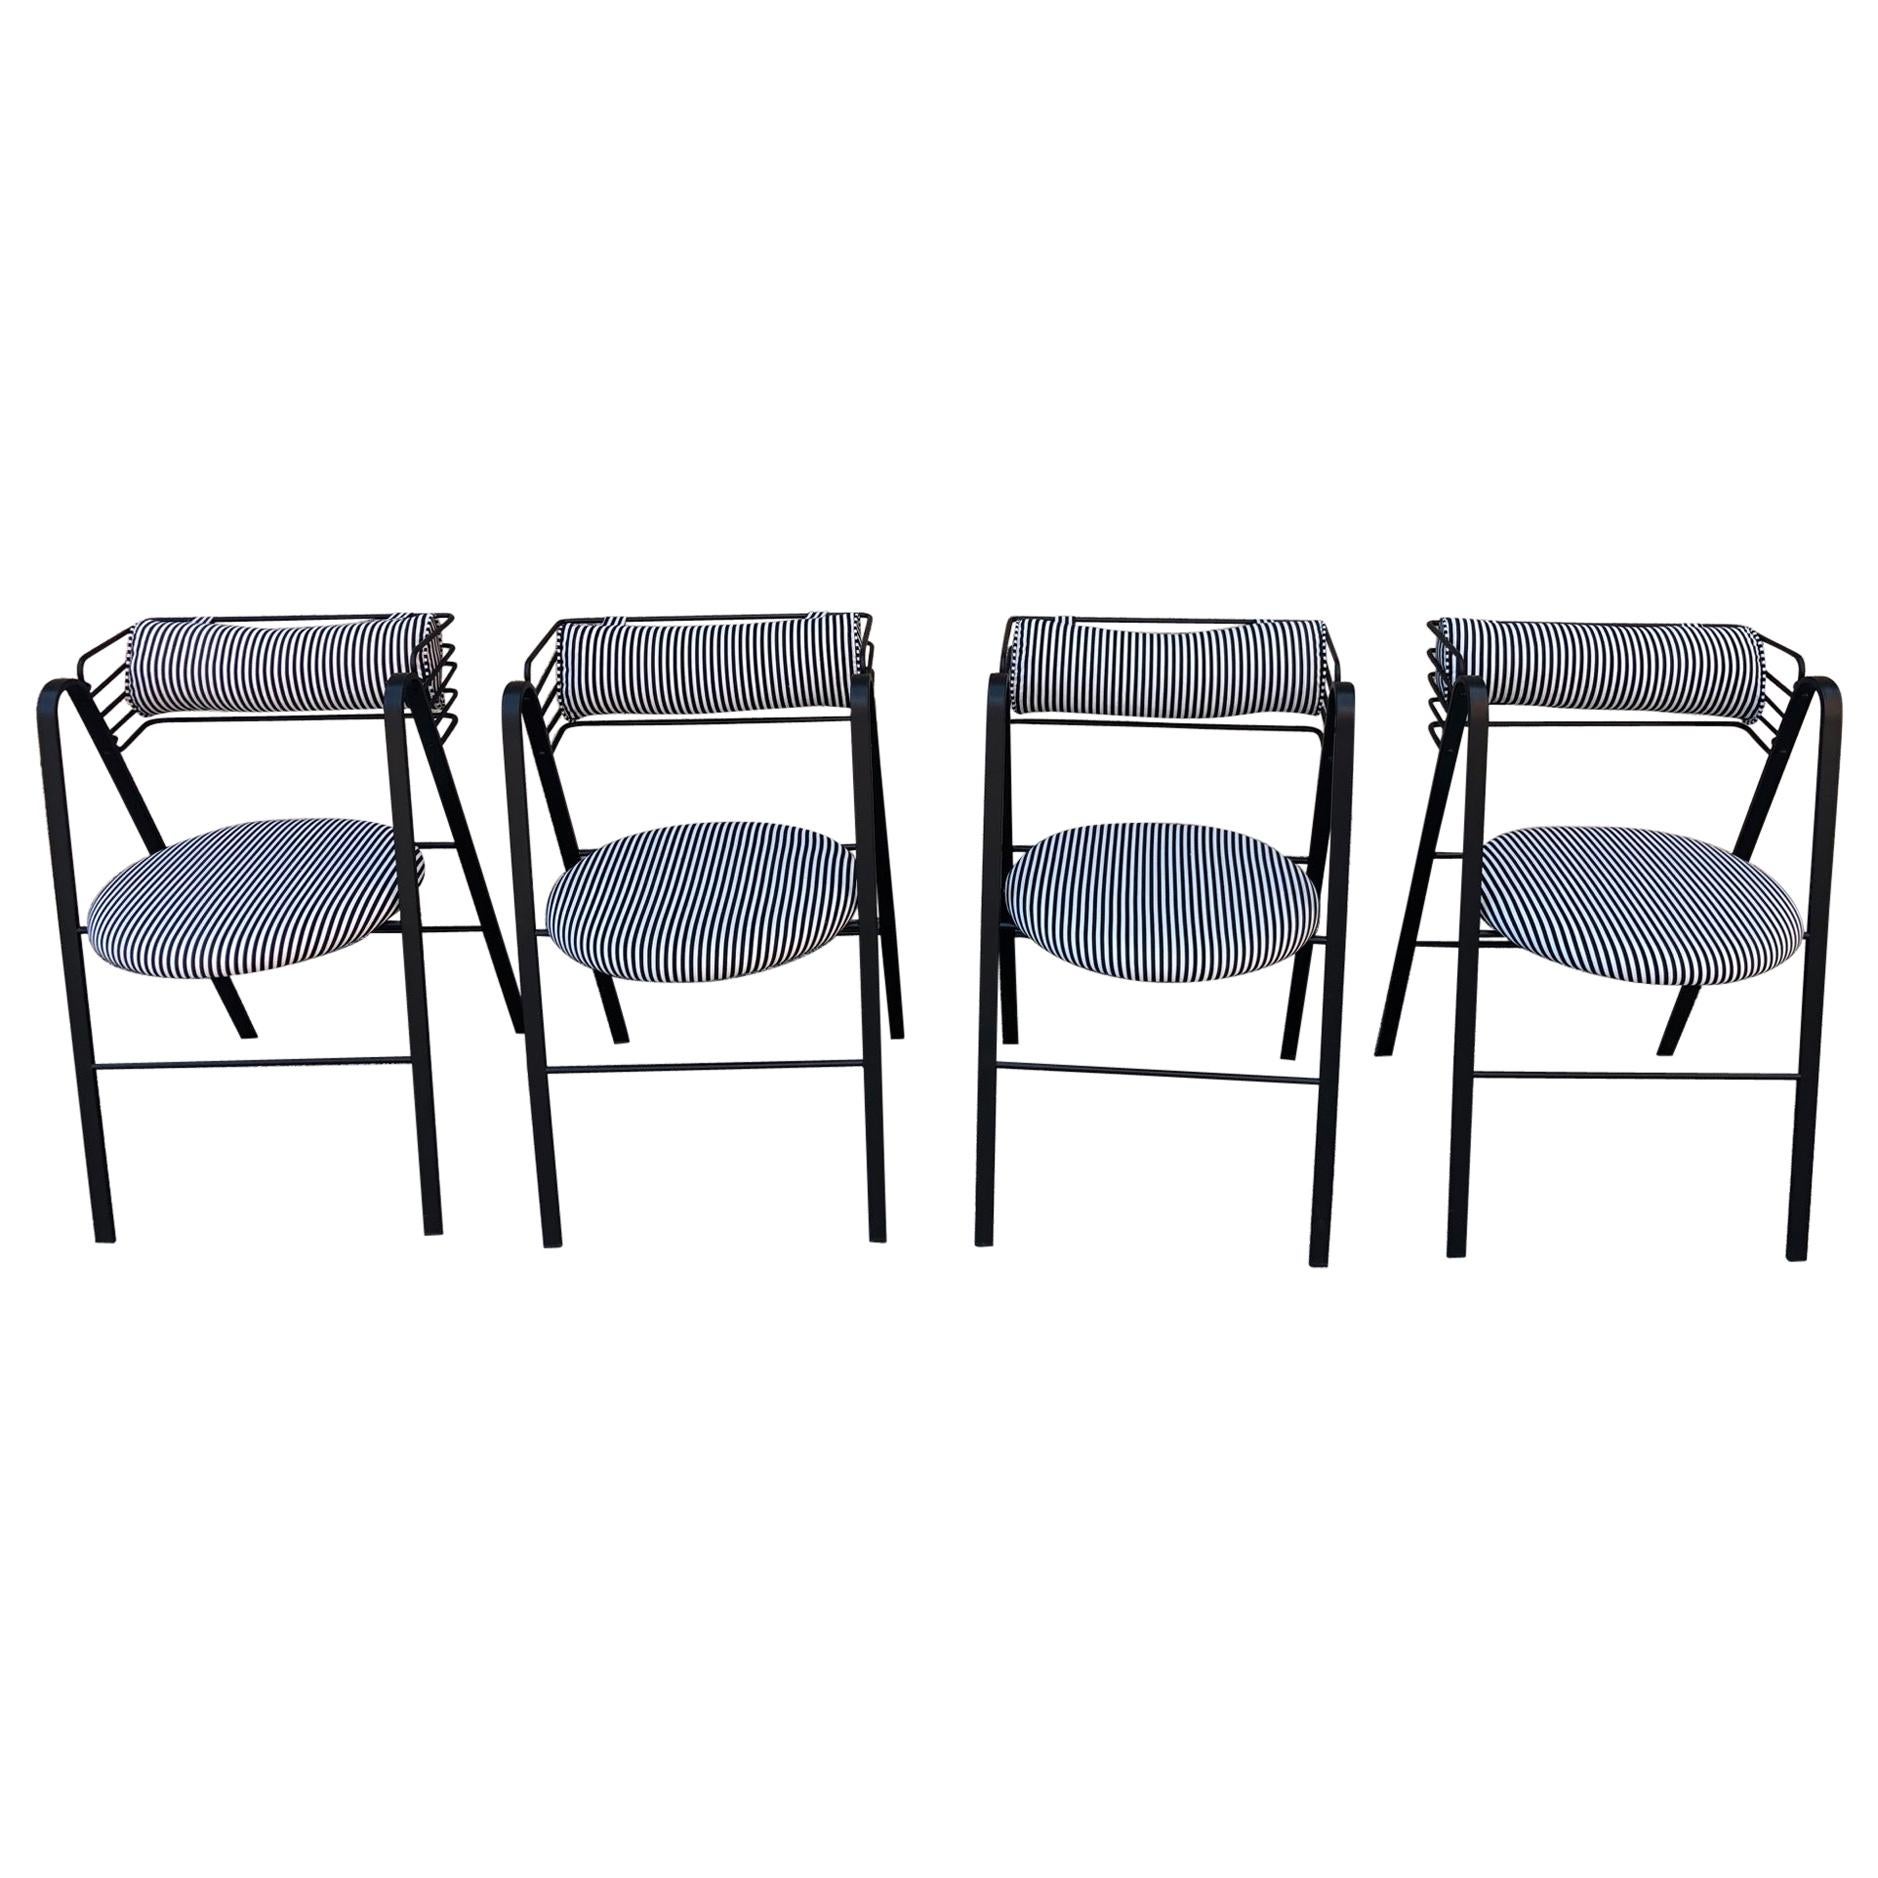 Mario Botta Set of 4 Chairs, Made in Italy, 1990s Metal